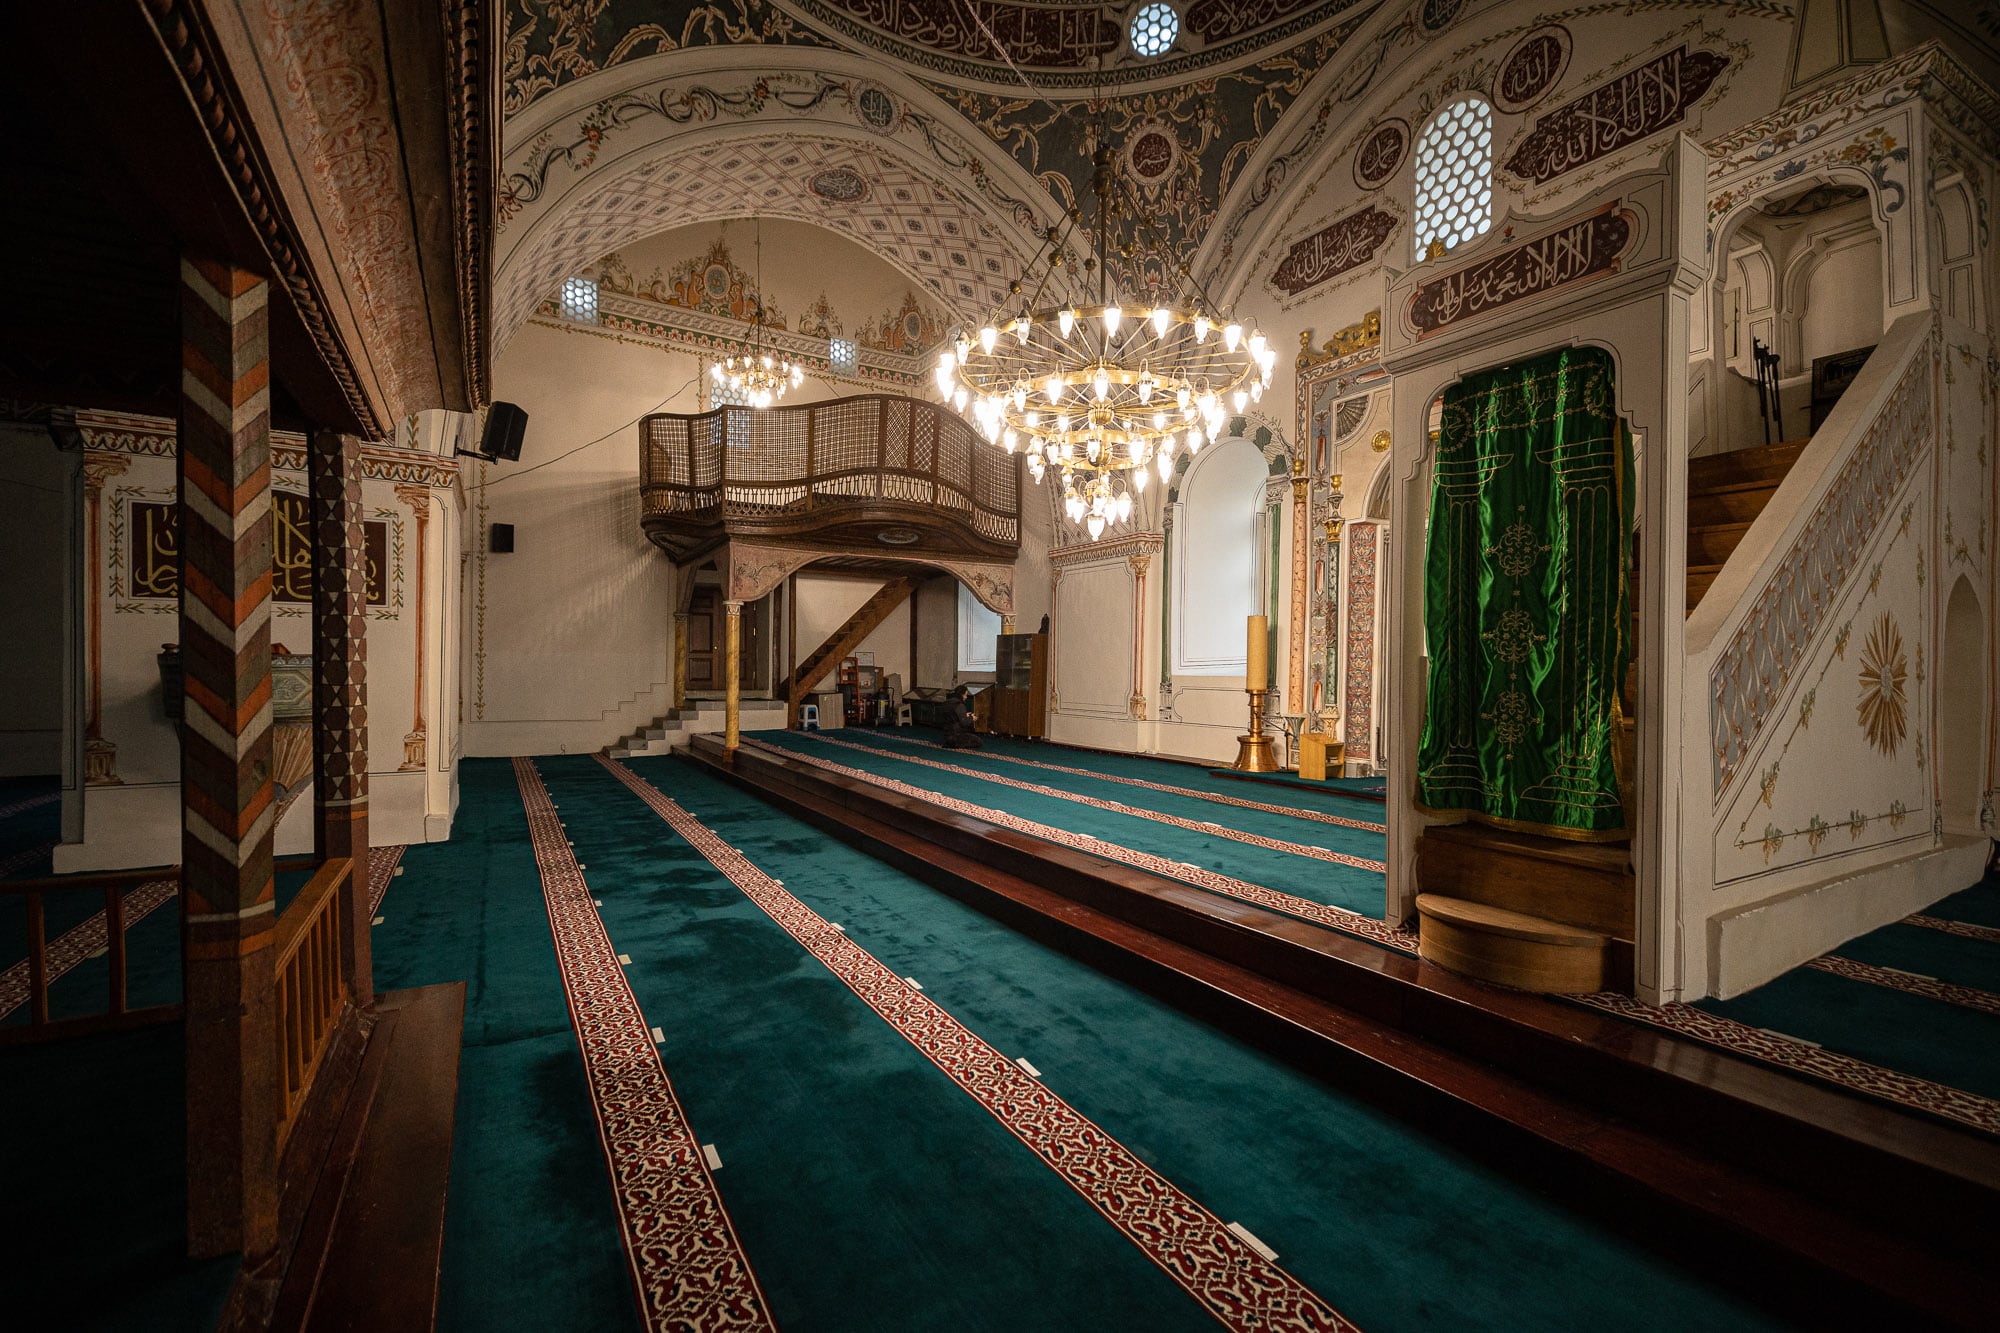 Inside the Friday Mosque of Plovdiv